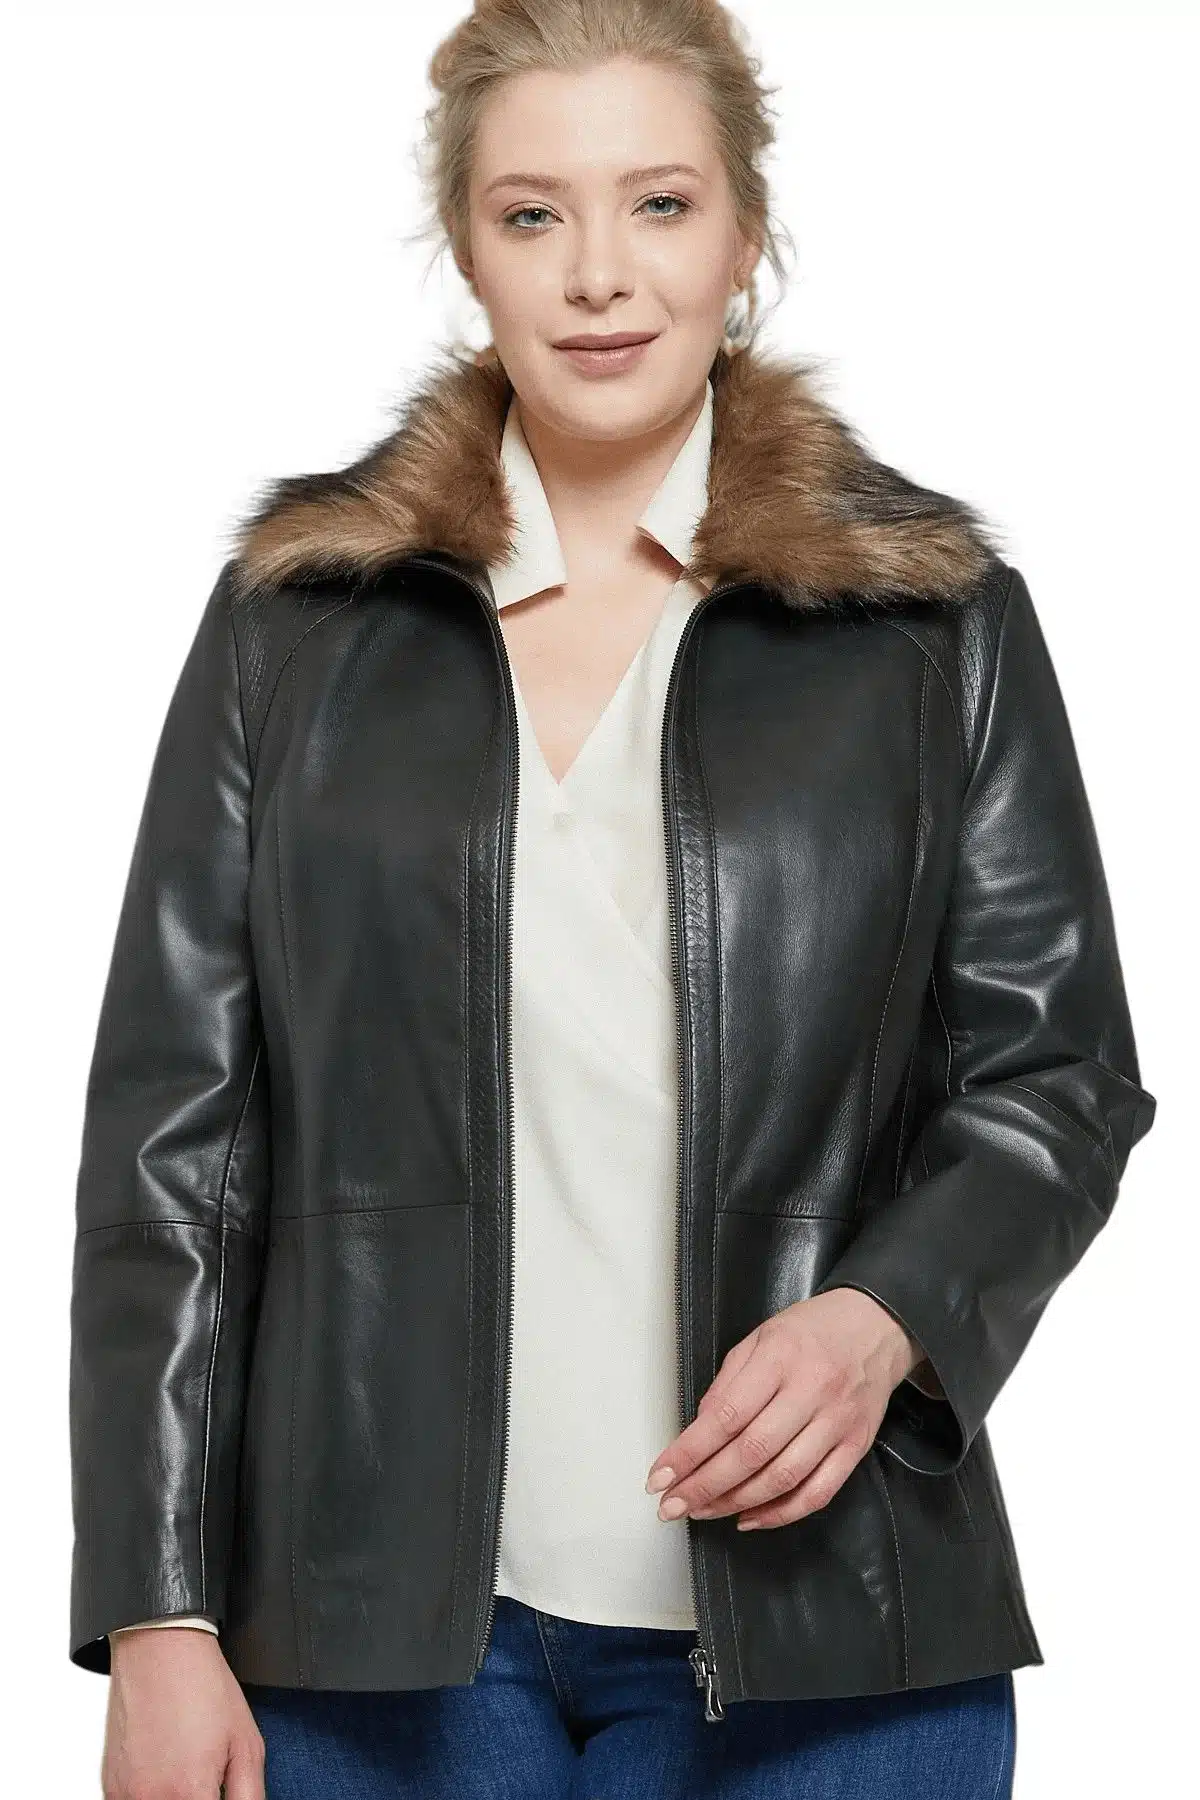 Indiana Women's 100 % Real Black Leather Fur Jacket